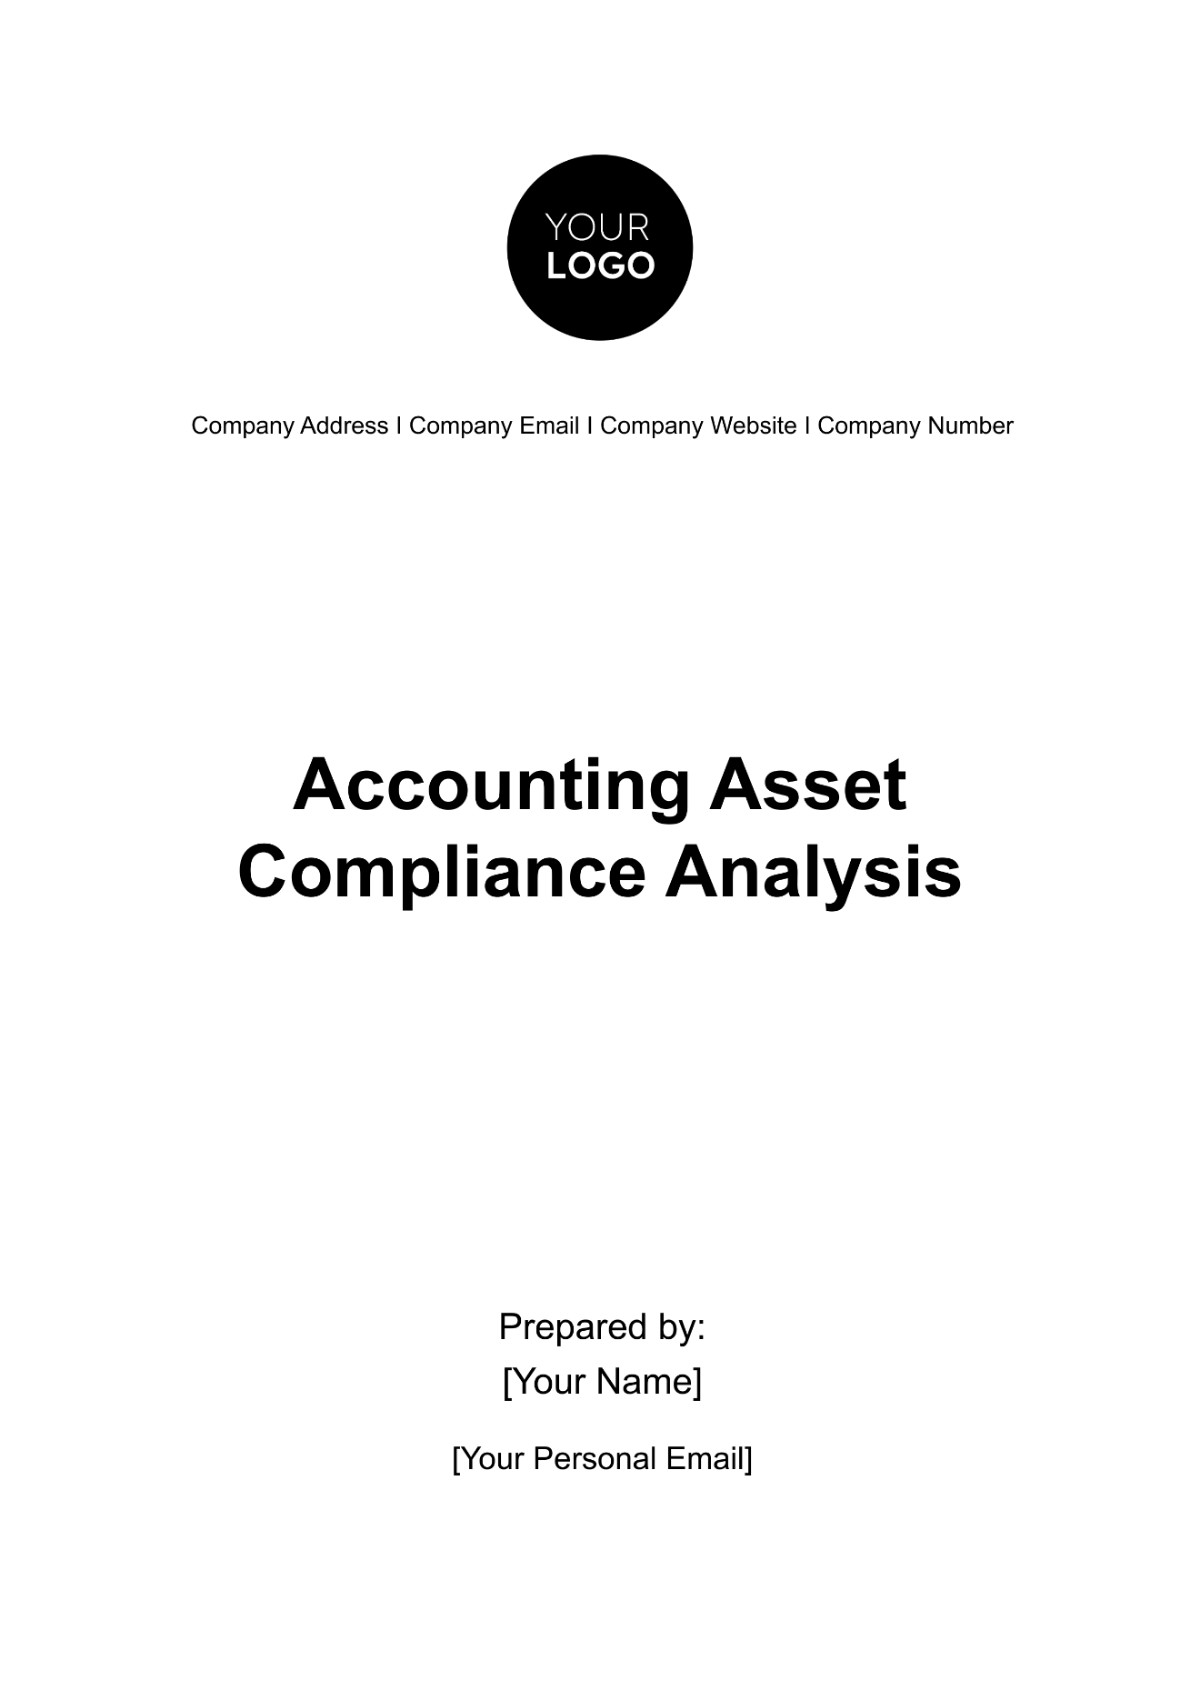 Accounting Asset Compliance Analysis Template